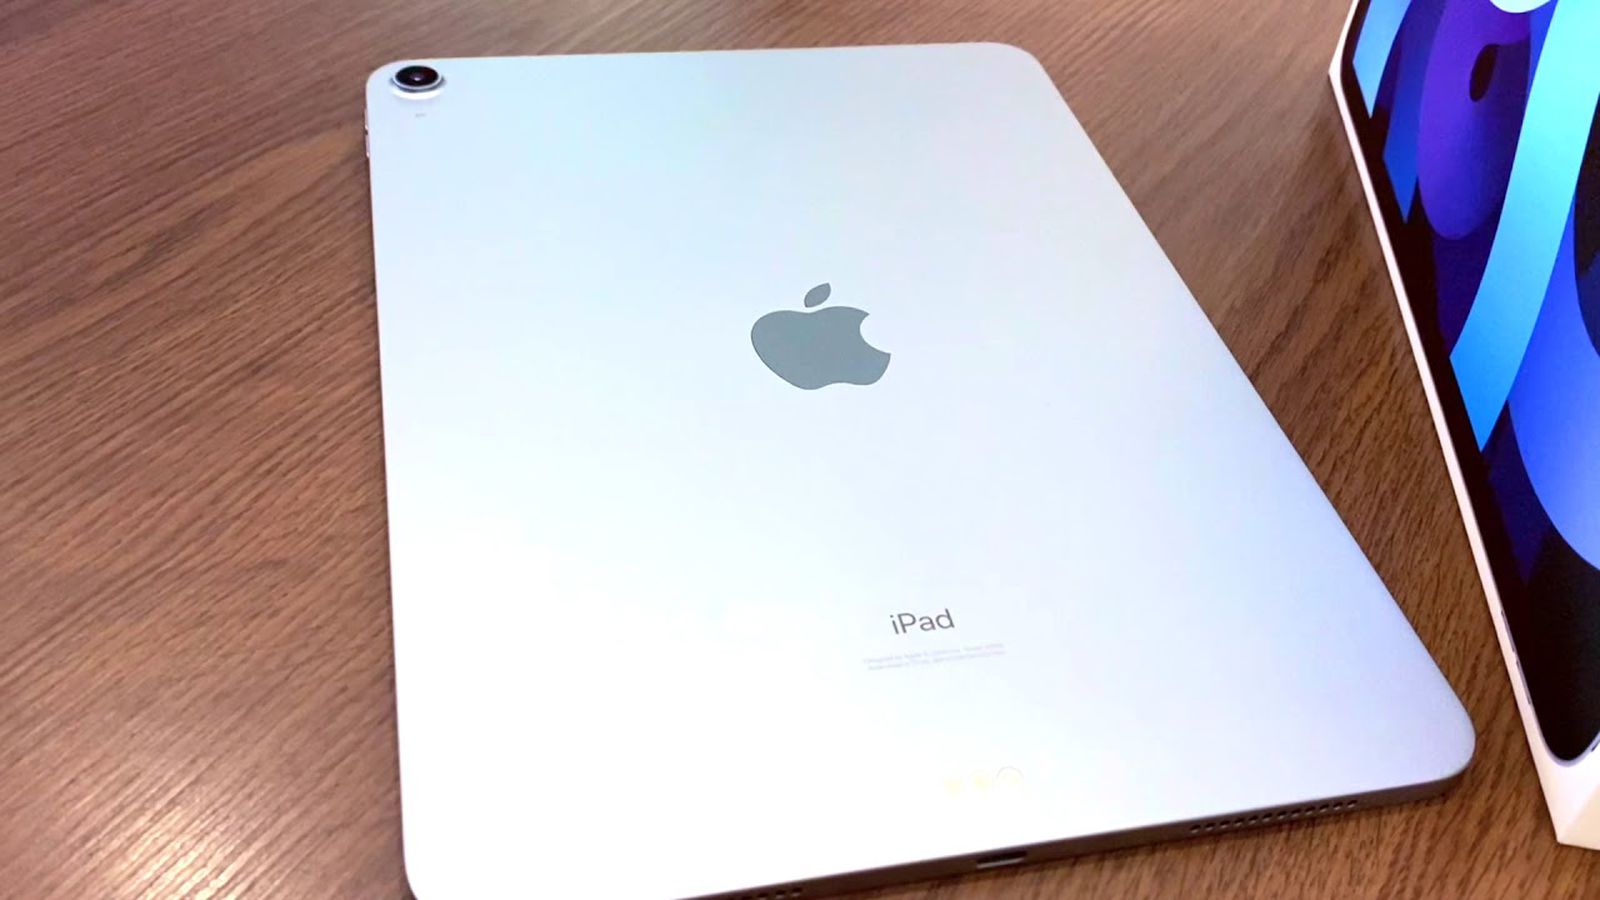 ipad air 2 gold unboxing